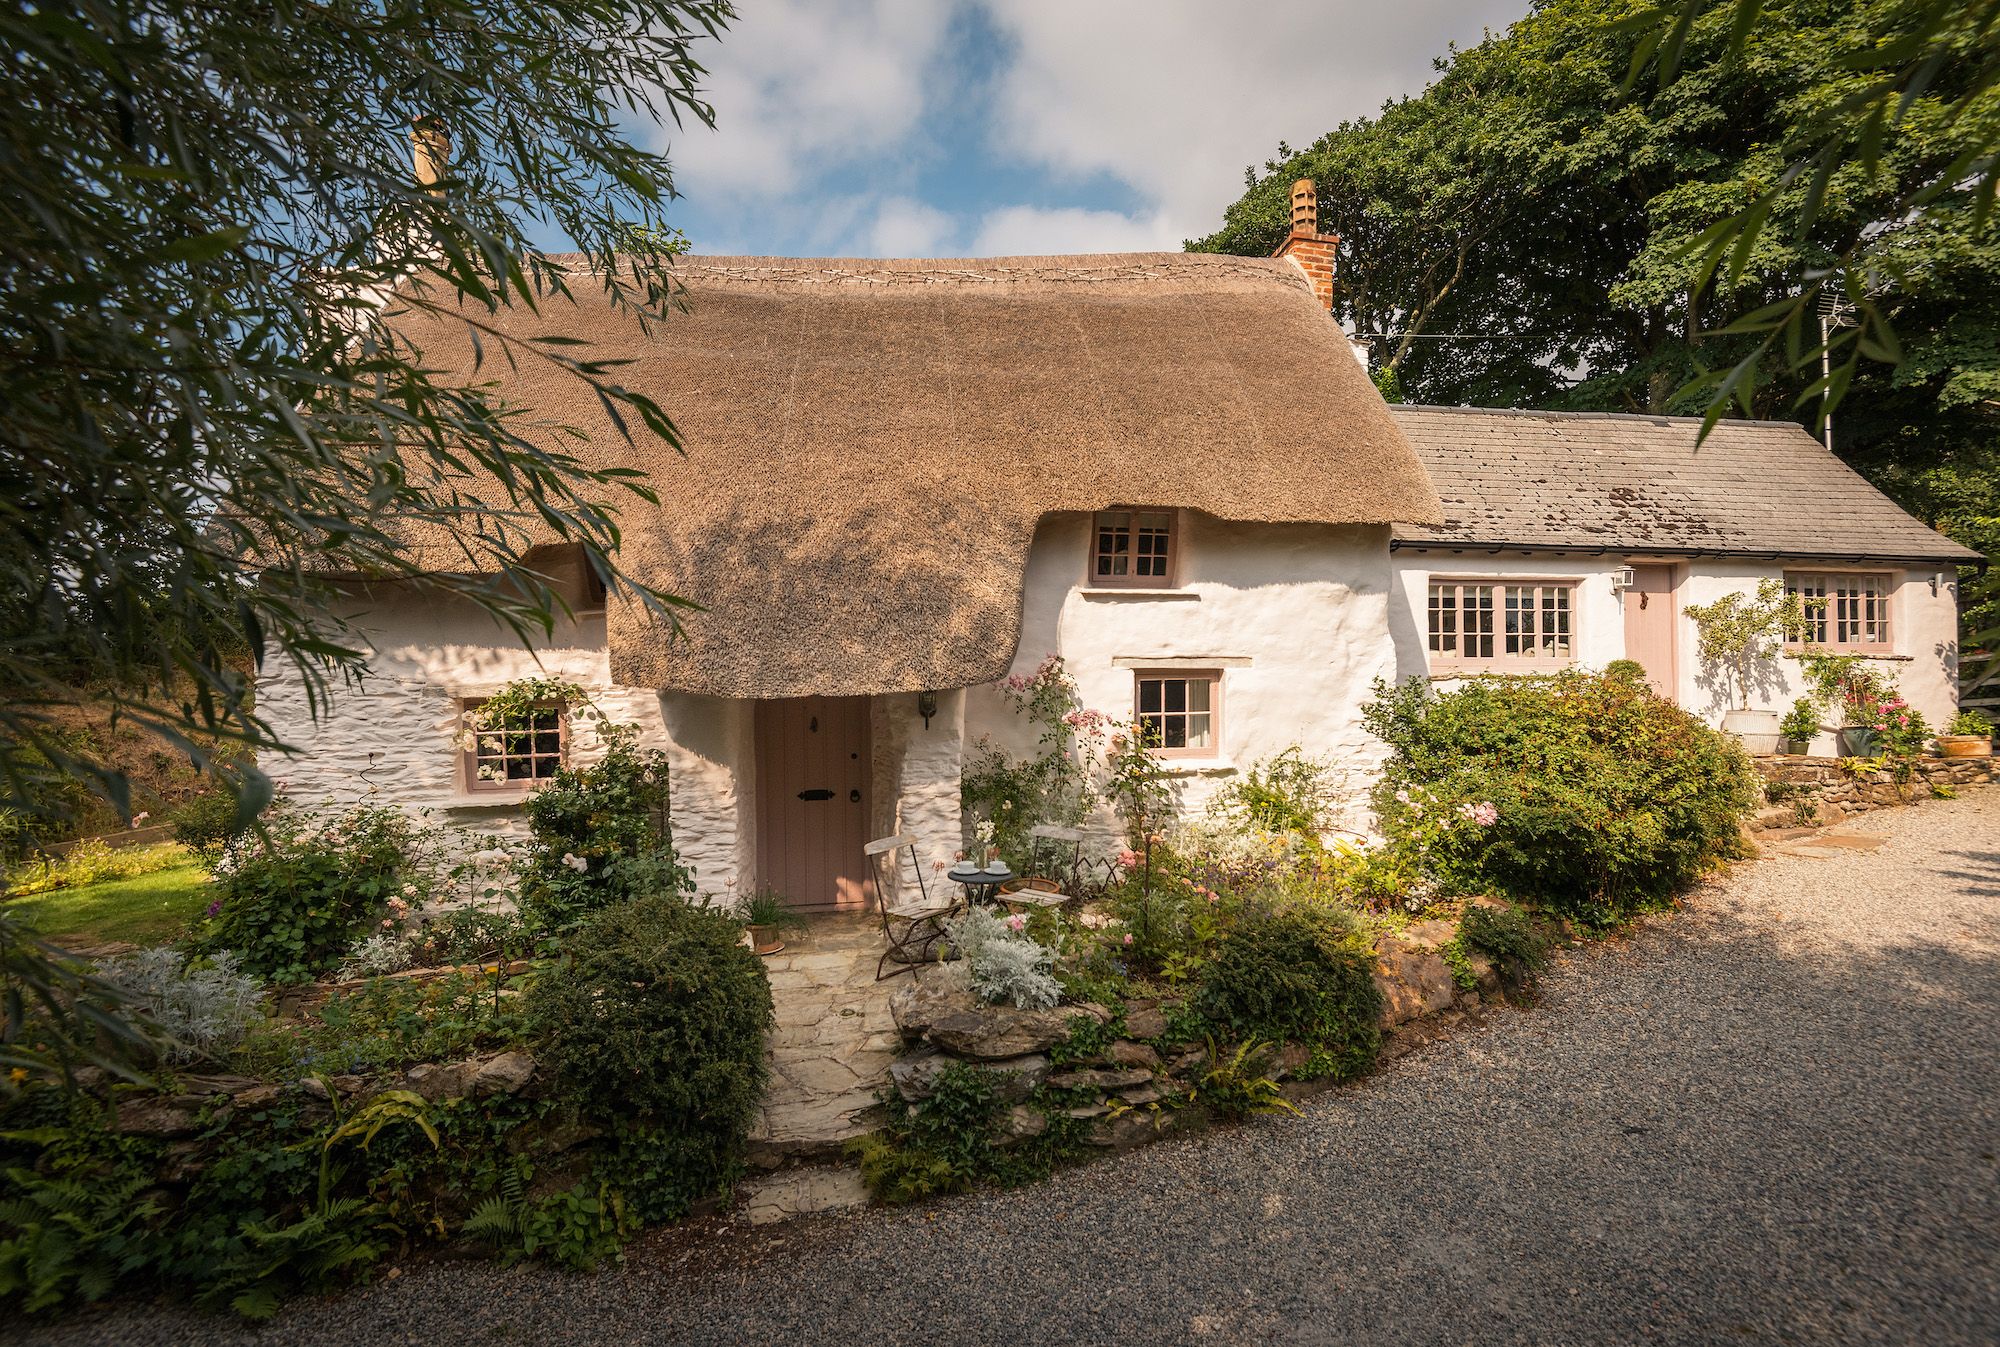 White Company Cornwall Cottage Thatched Country Rustic Whitewashed Rural Farmhouse Exterior 6447ebed777be 